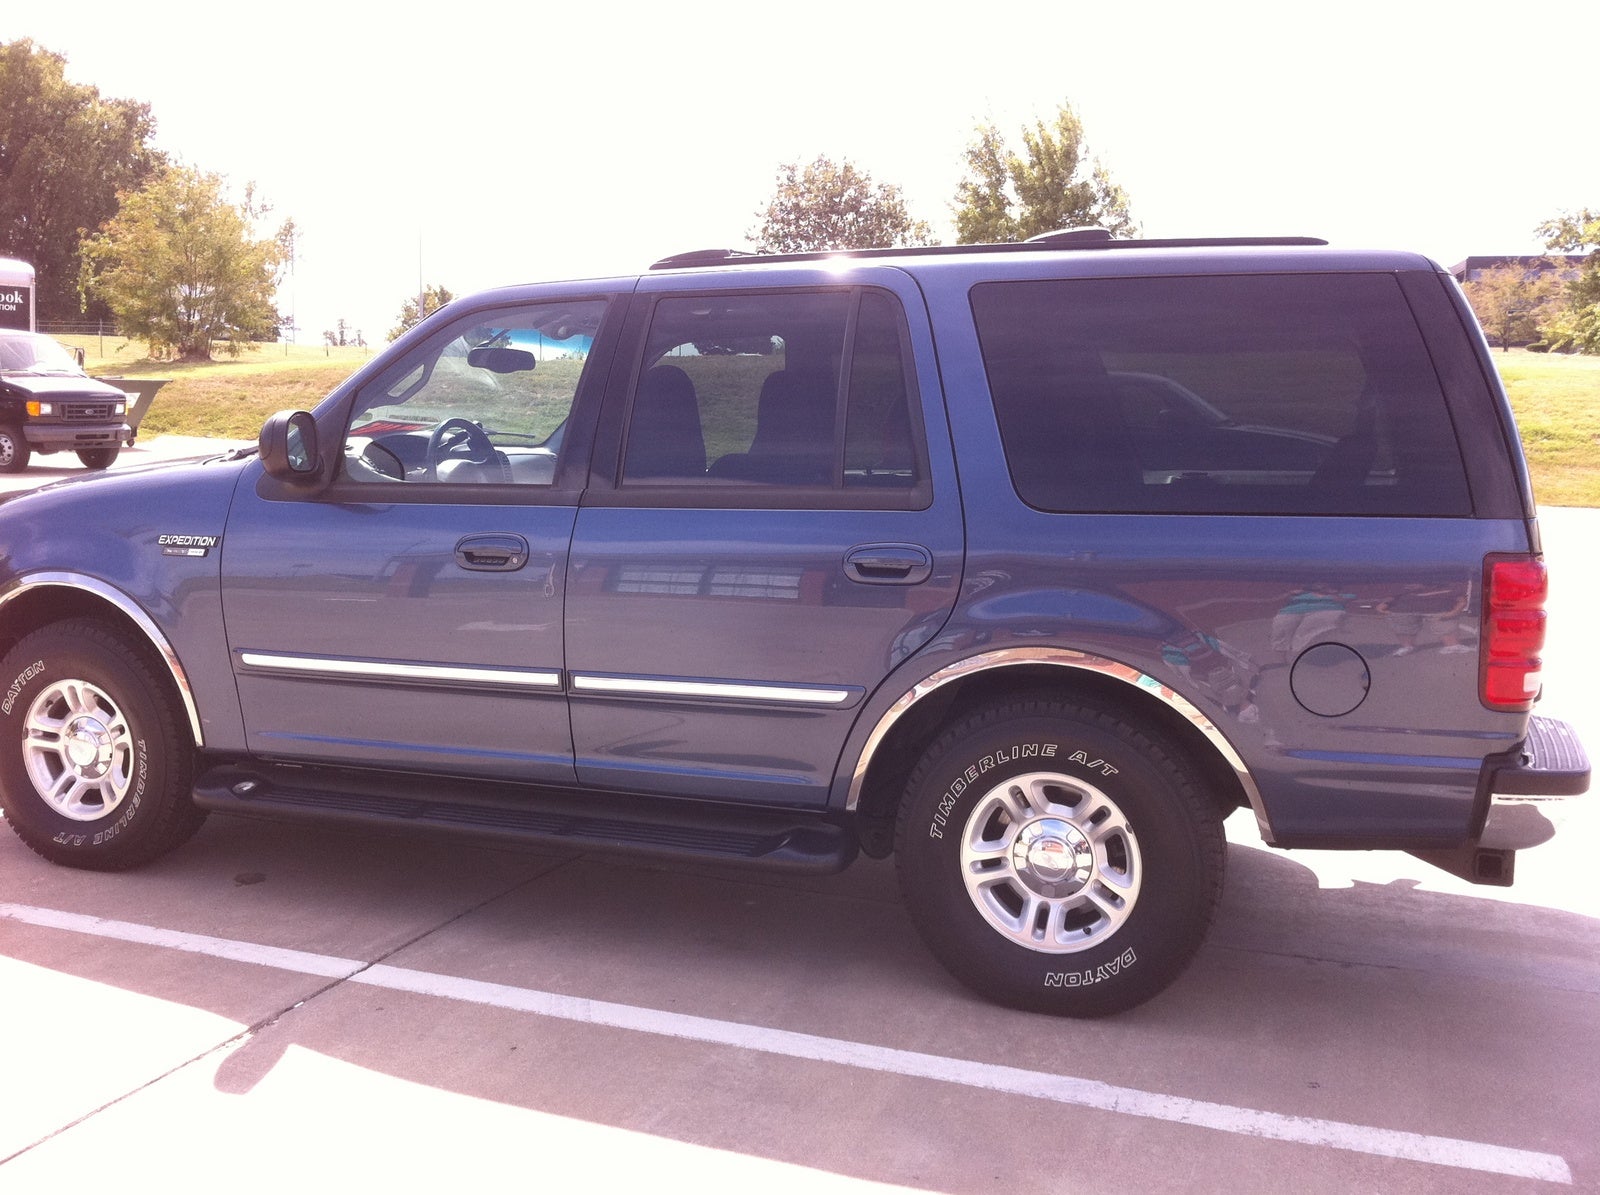 2000 Ford expedition rollover rating